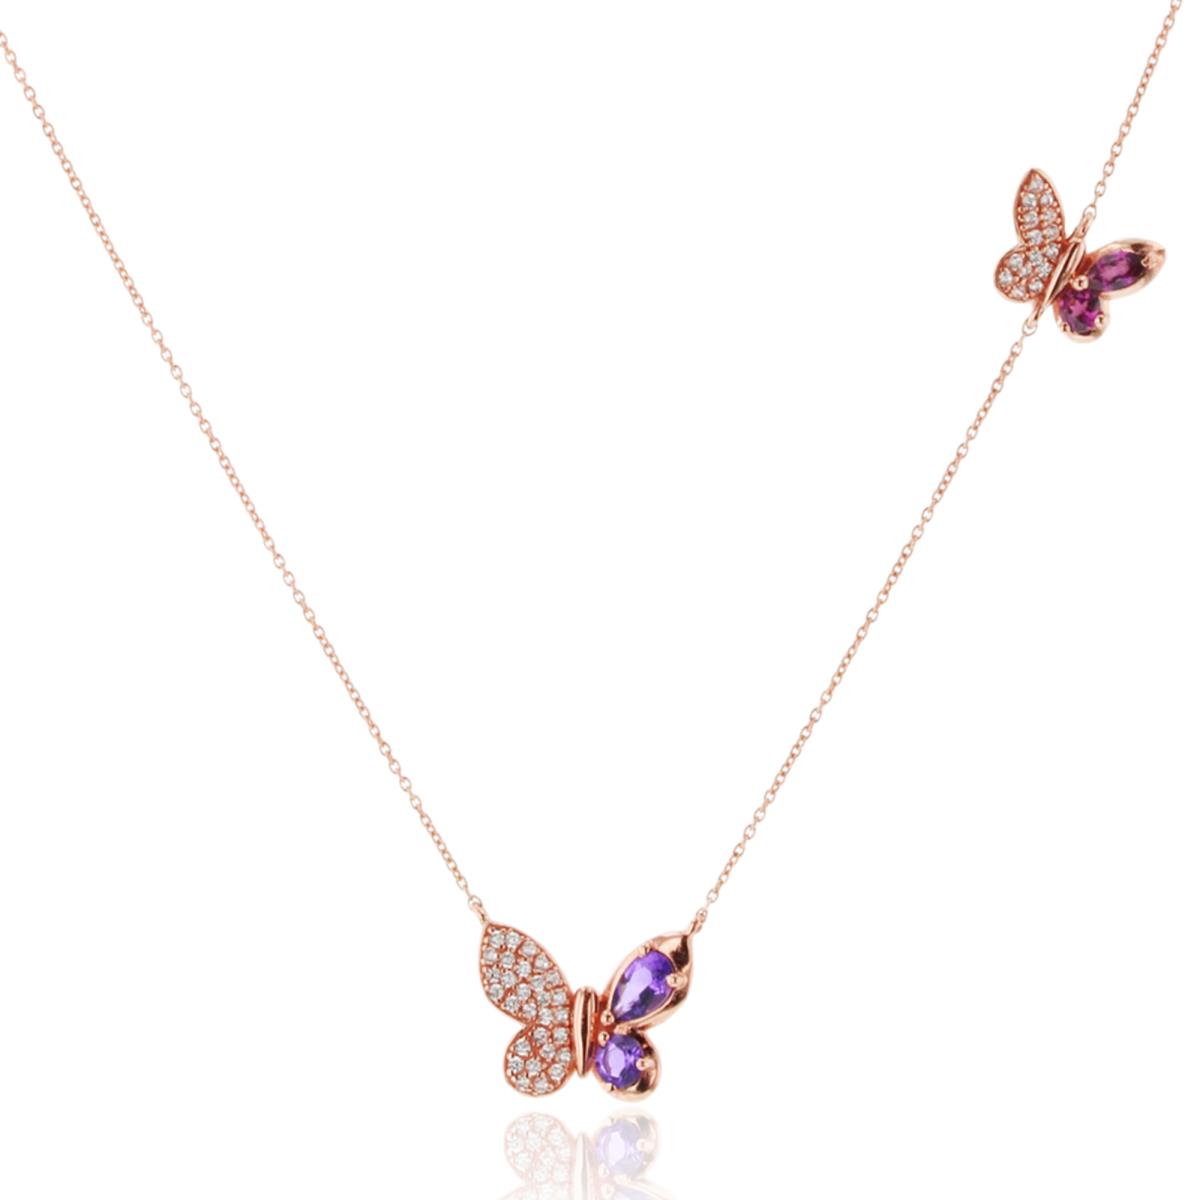 14K Rose Gold 0.05 Cttw Diamond, Rd Am & Ps ,Mq Rhodolite Double Butterfly 16" Necklace